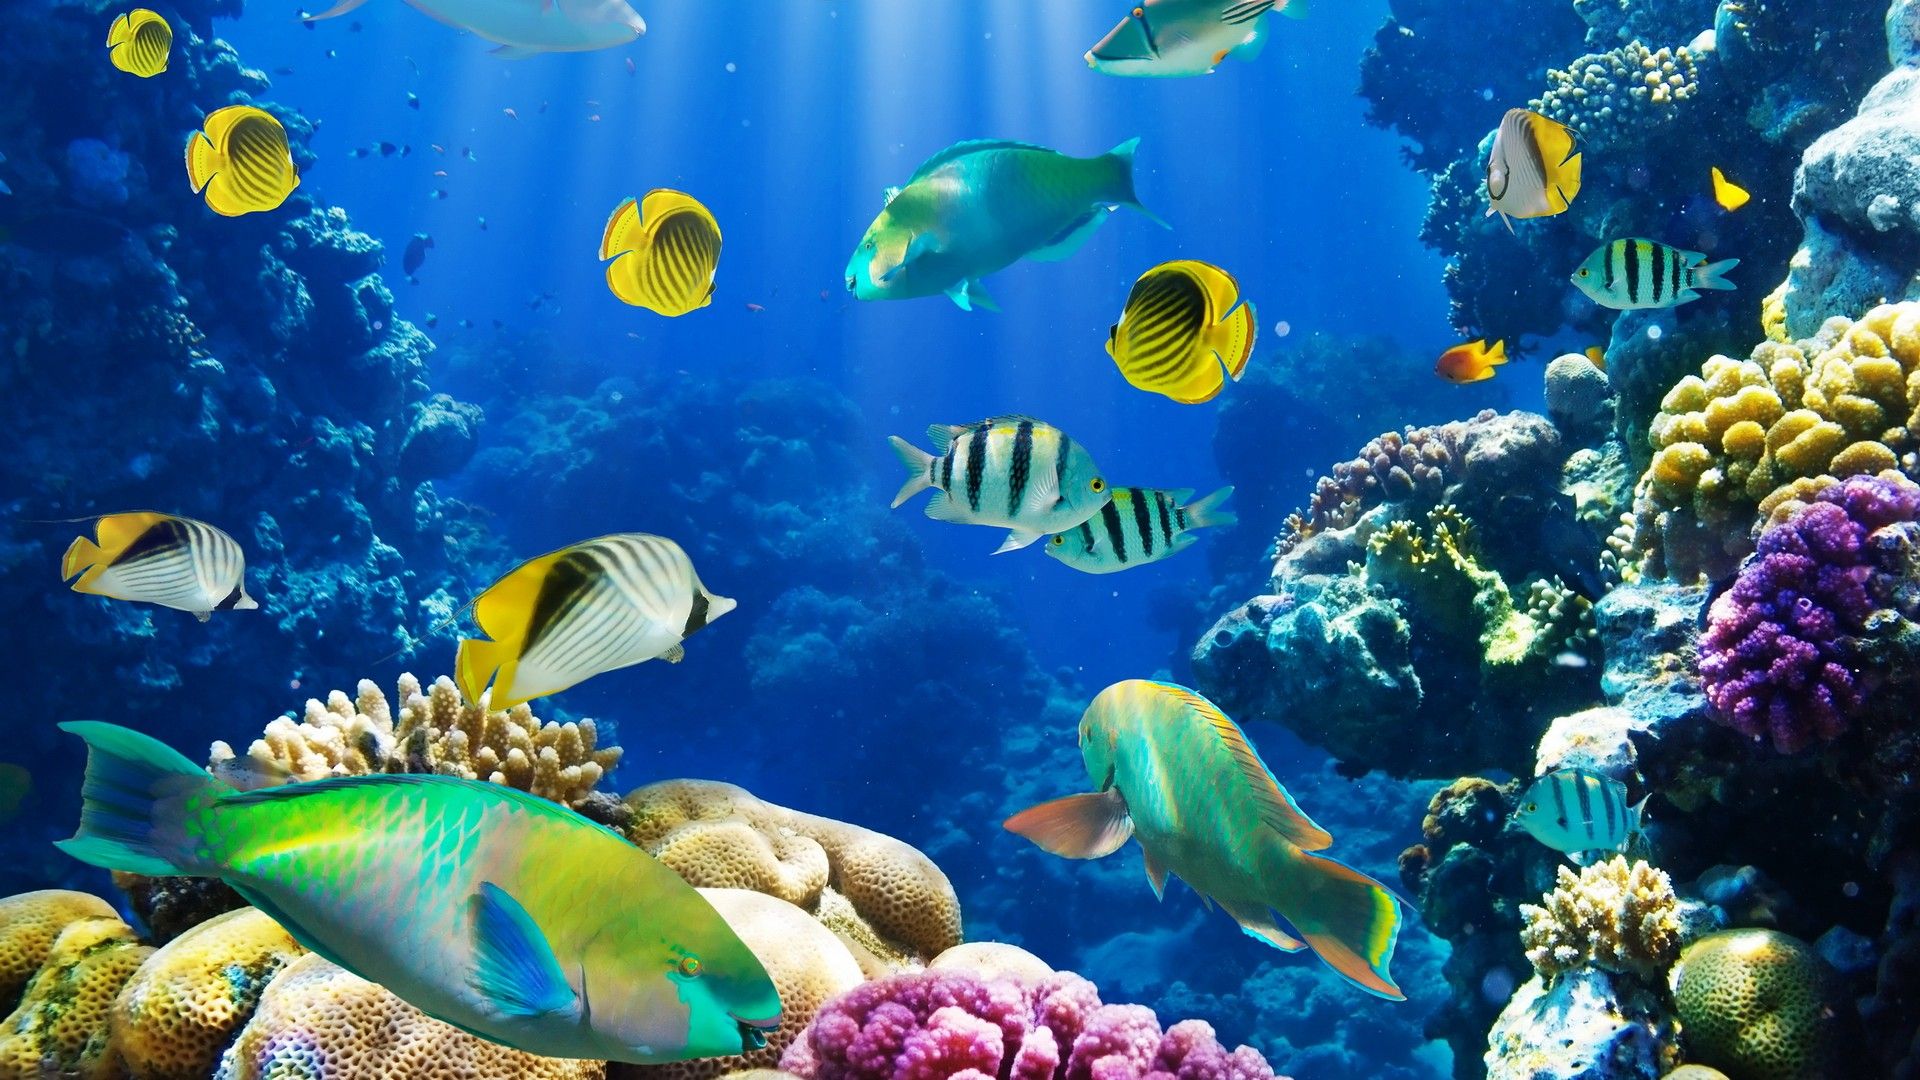 Coral Reef HD Wallpaper - Coral Reef Photos, New Wallpapers